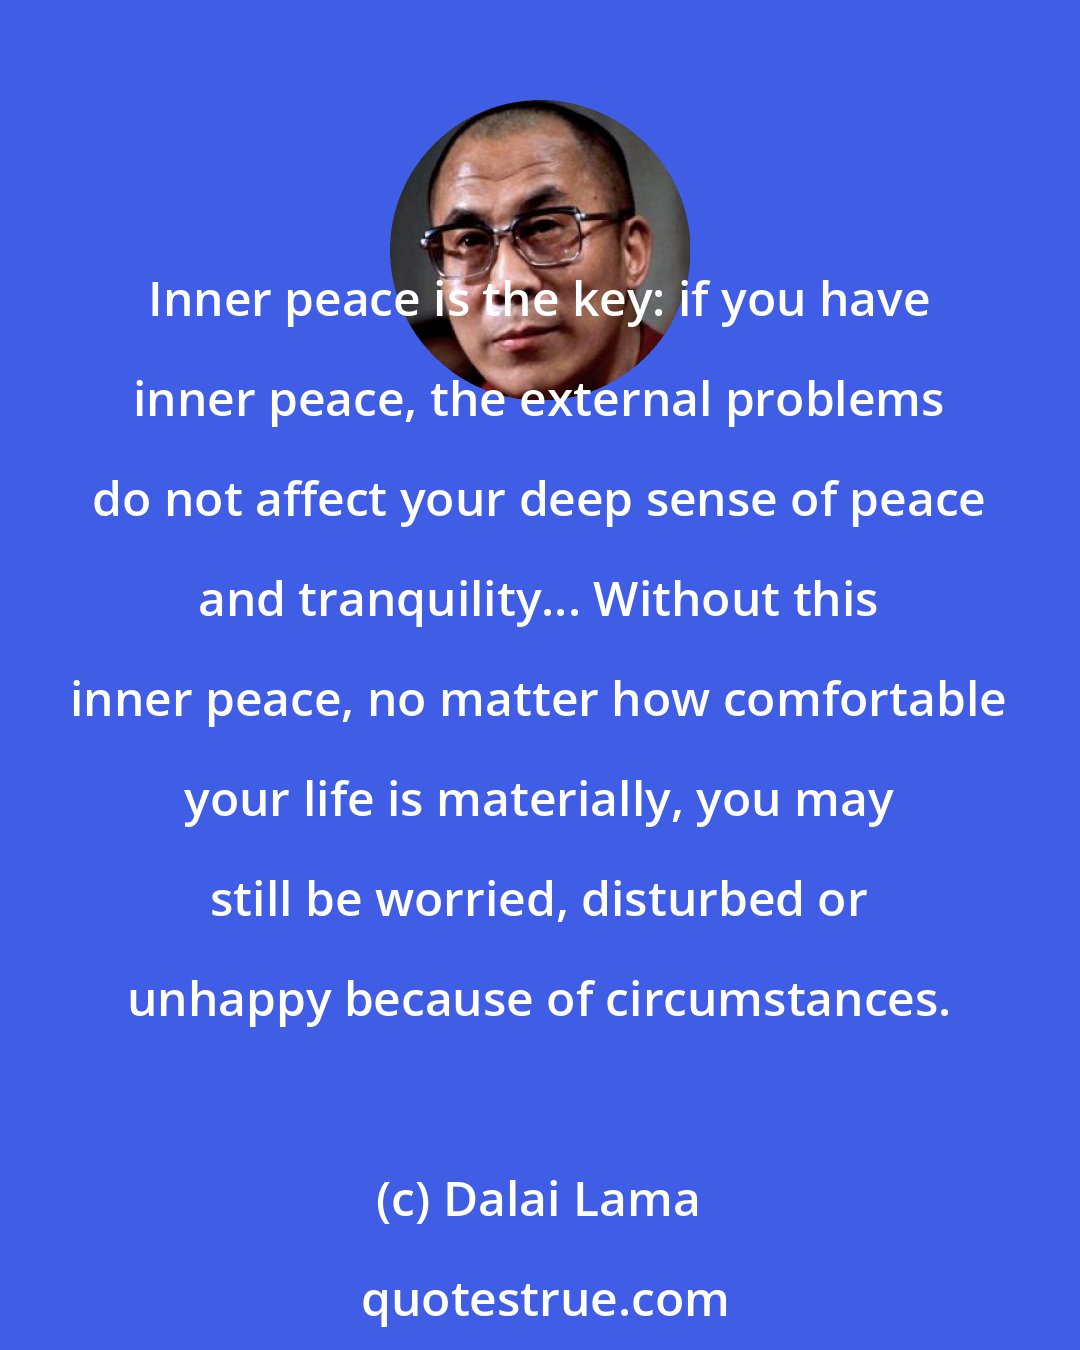 Dalai Lama: Inner peace is the key: if you have inner peace, the external problems do not affect your deep sense of peace and tranquility... Without this inner peace, no matter how comfortable your life is materially, you may still be worried, disturbed or unhappy because of circumstances.